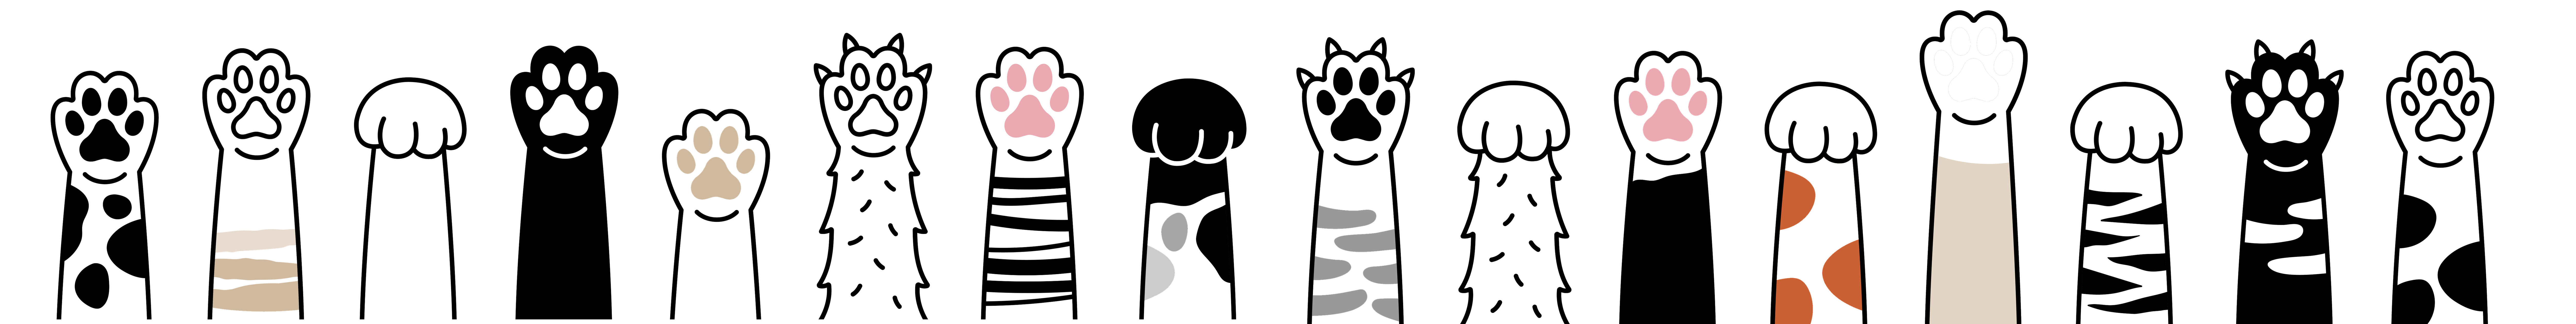 A graphic of paws of different colors and patterns reach up, used as a page separator.